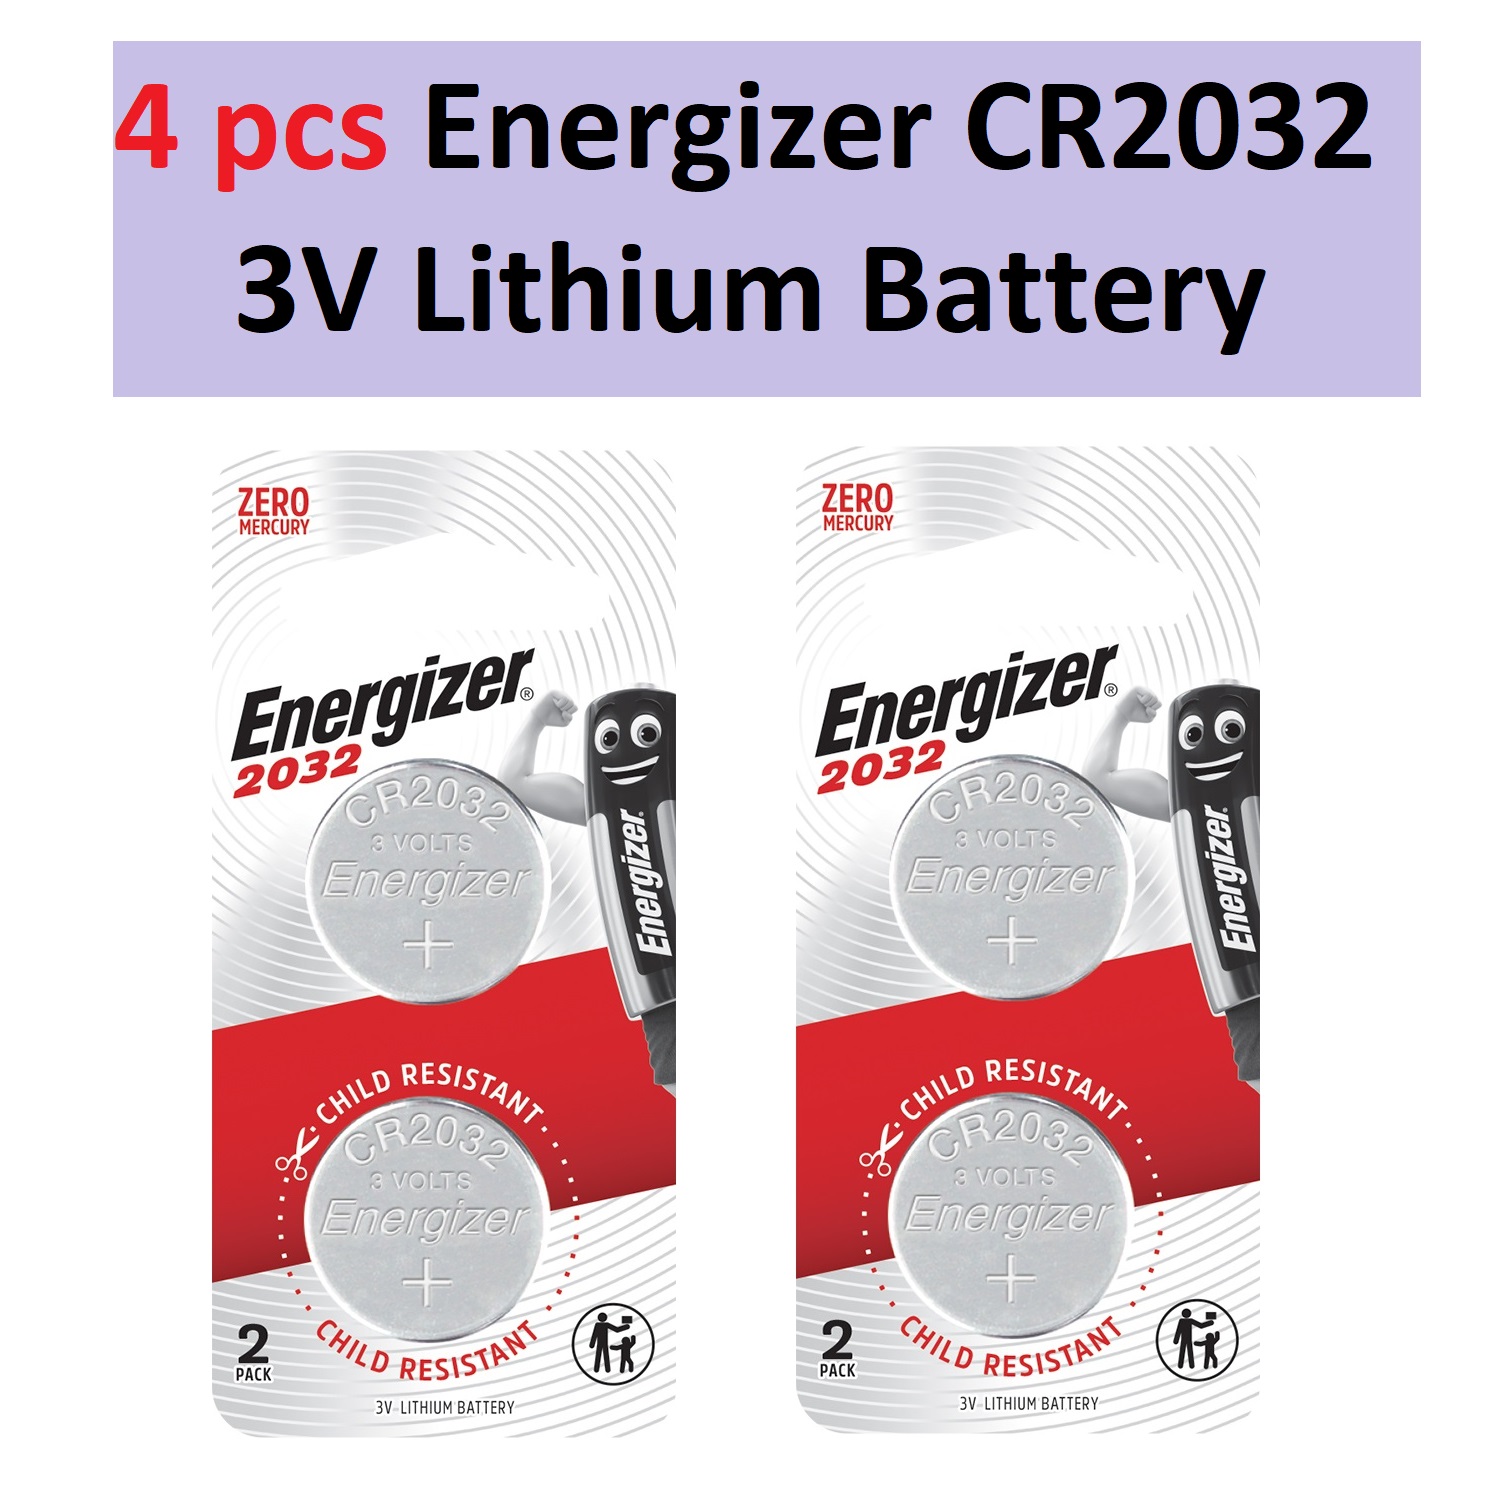 Energizer CR2032 (4 pcs) CR 2032 Battery Coin Cell Button 3V Lithium  Batteries CMOS PC Desktop Laptop Motherboard Car Key Weighing Scale Battery  2032